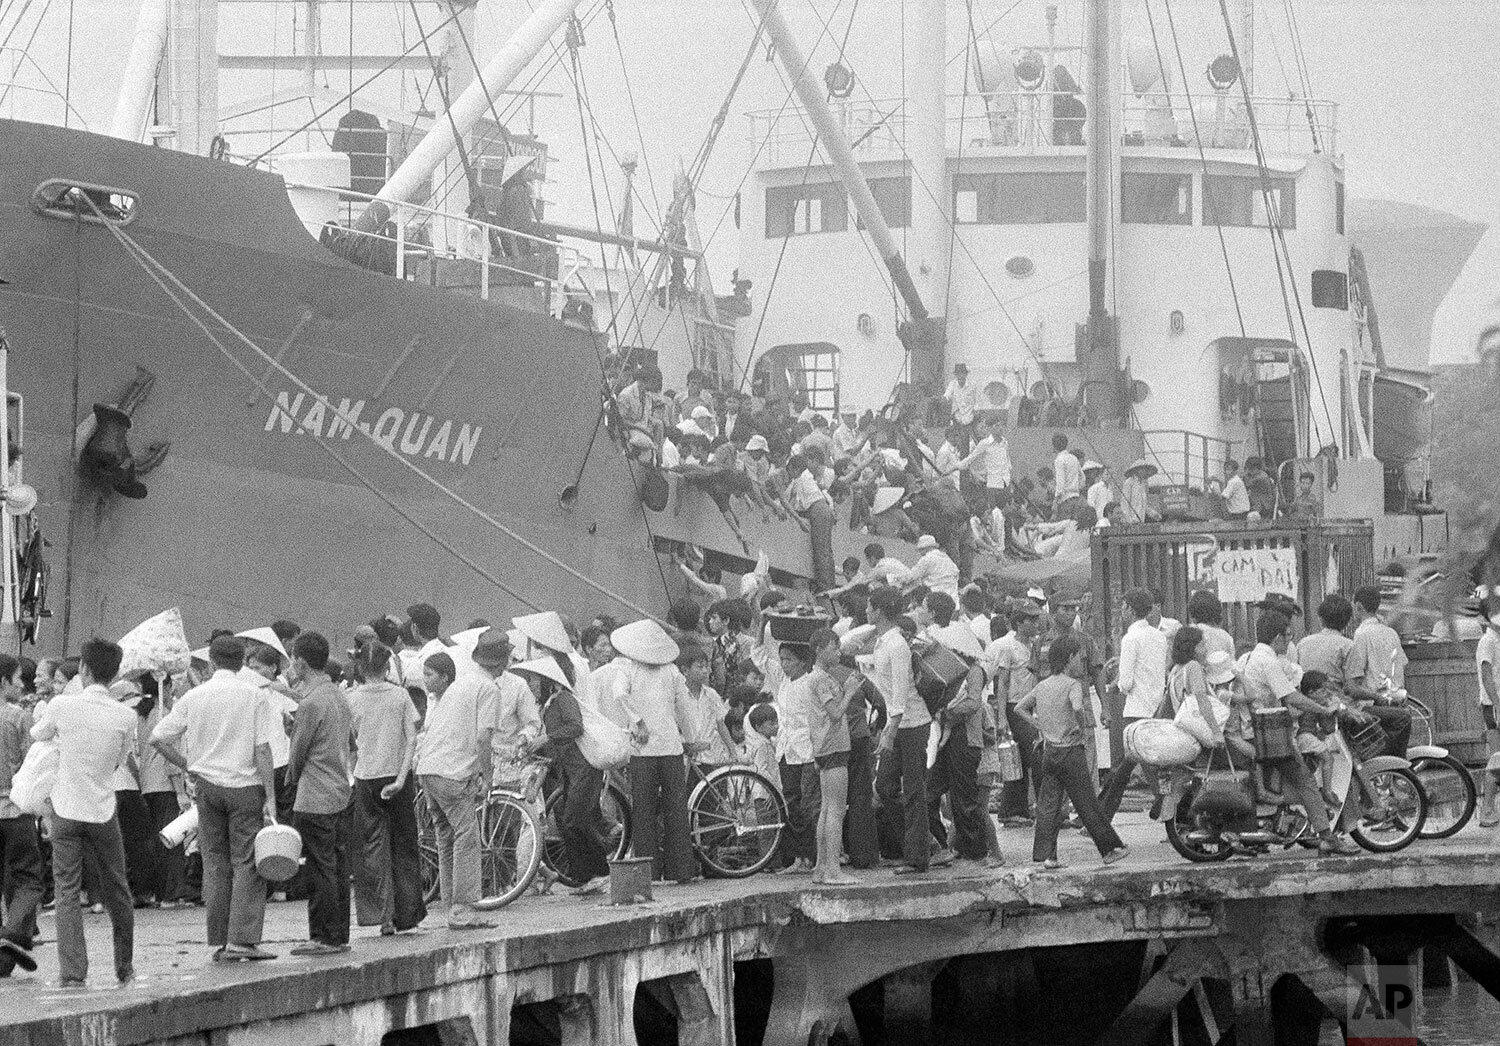  Evacuees board a boat on the Saigon water front in Saigon as PRG troops closing in on April 30, 1975. (AP Photo/Matt Franjola) 